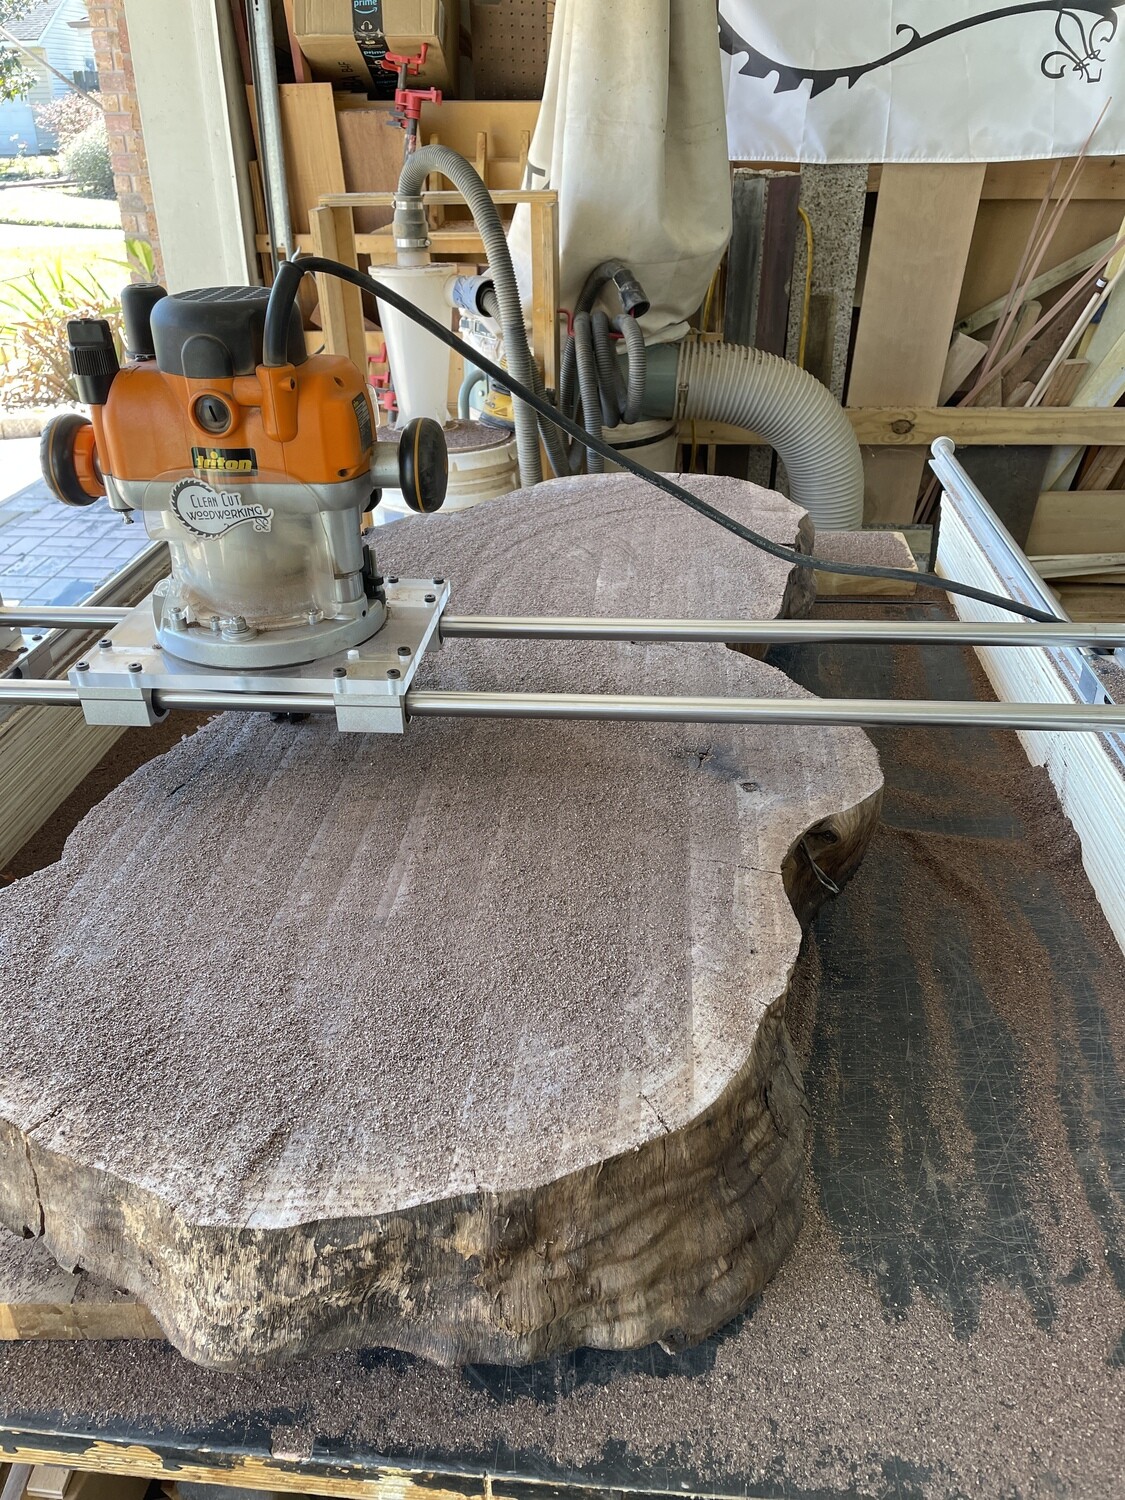 60" x 60"  Woodworking Router Sled